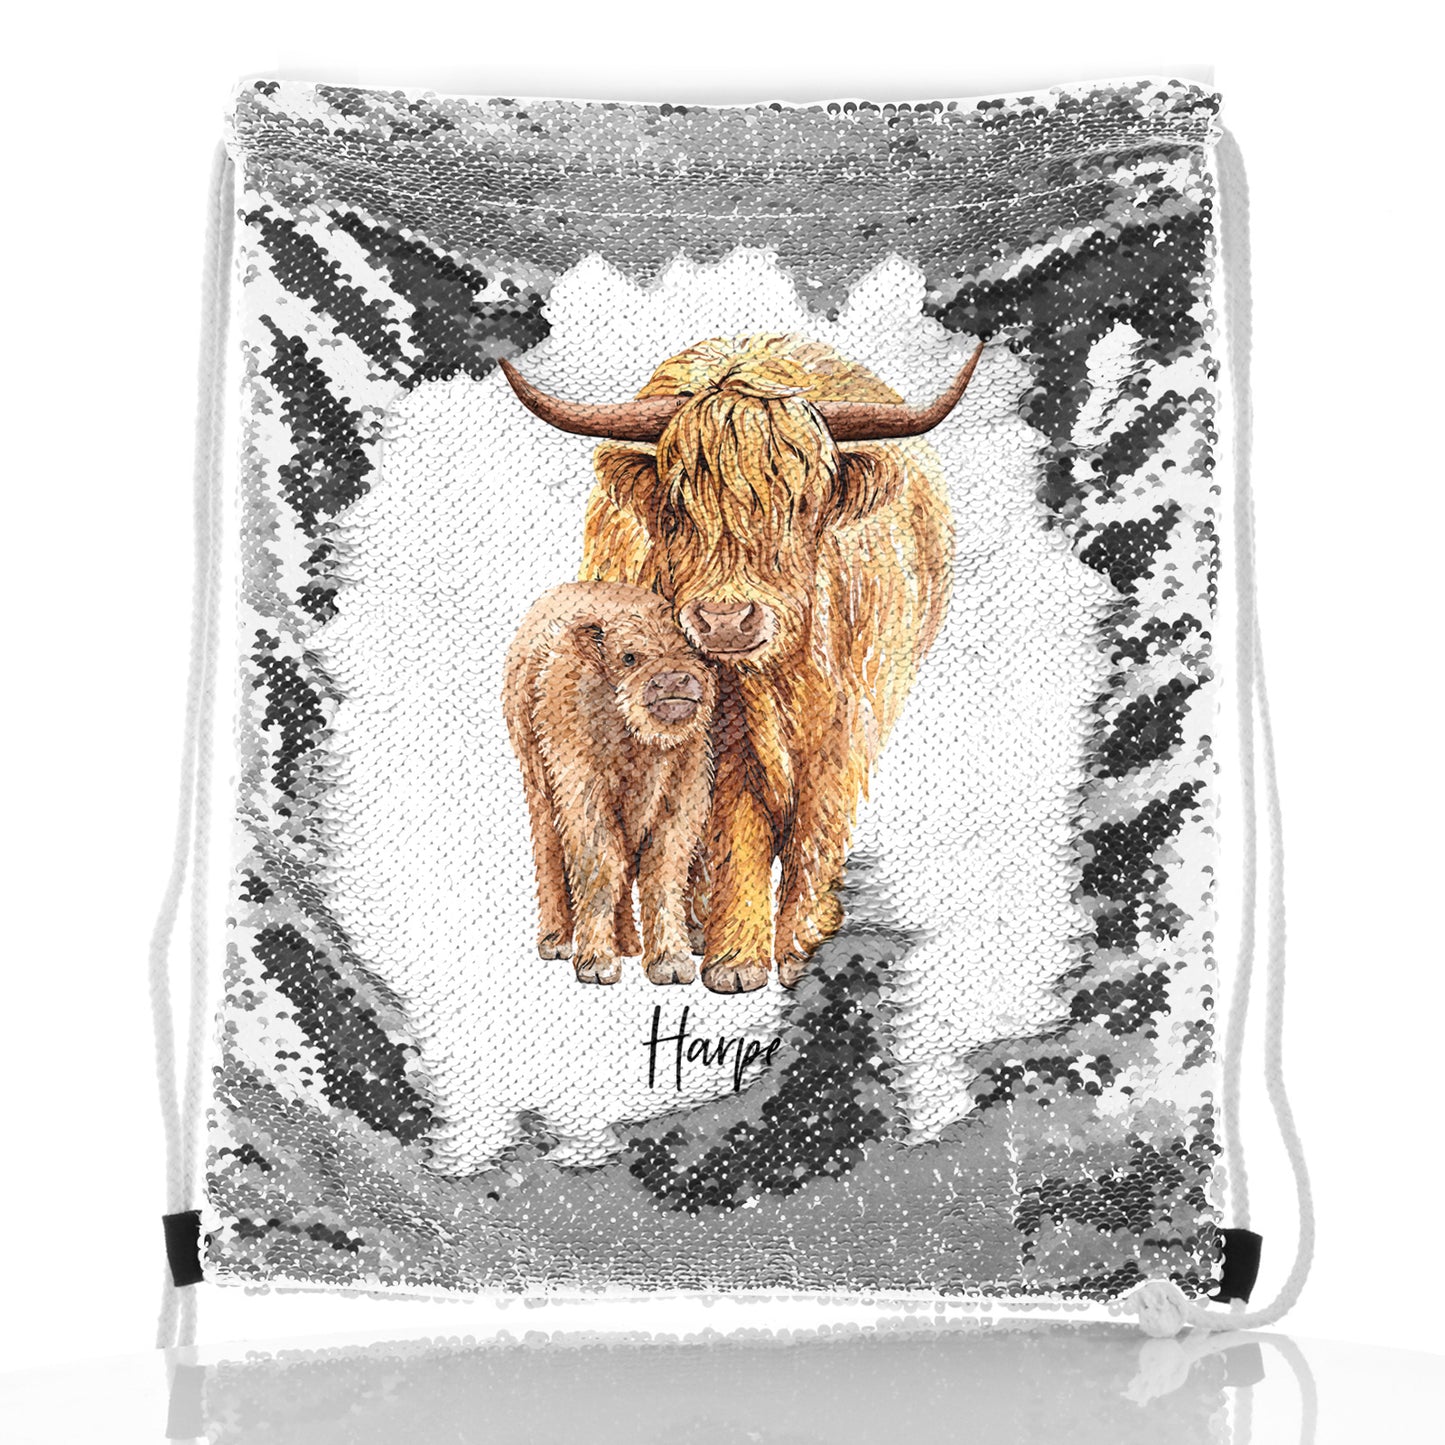 Personalised Sequin Drawstring Backpack with Welcoming Text and Relaxing Mum and Baby Highland Cows